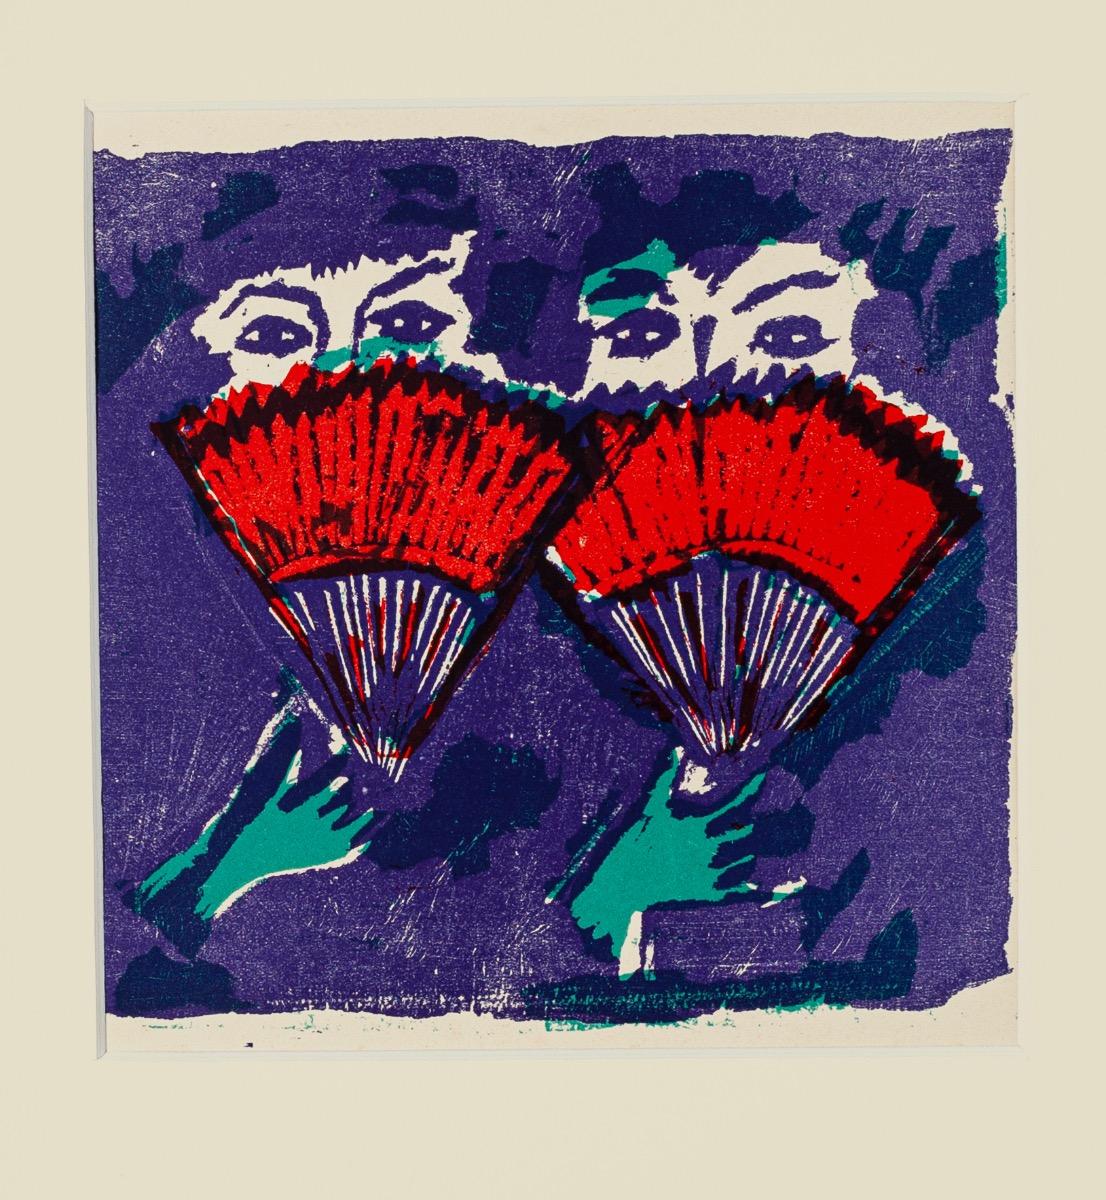 Hand Fan is an original woodcut realized by Mino Maccari.

Included a white Passepartout: 49 x 34 cm.

The state of preservation is very good.

The artwork represents two women faces behind a hand fan, through the vivid reddish color of hand fan and